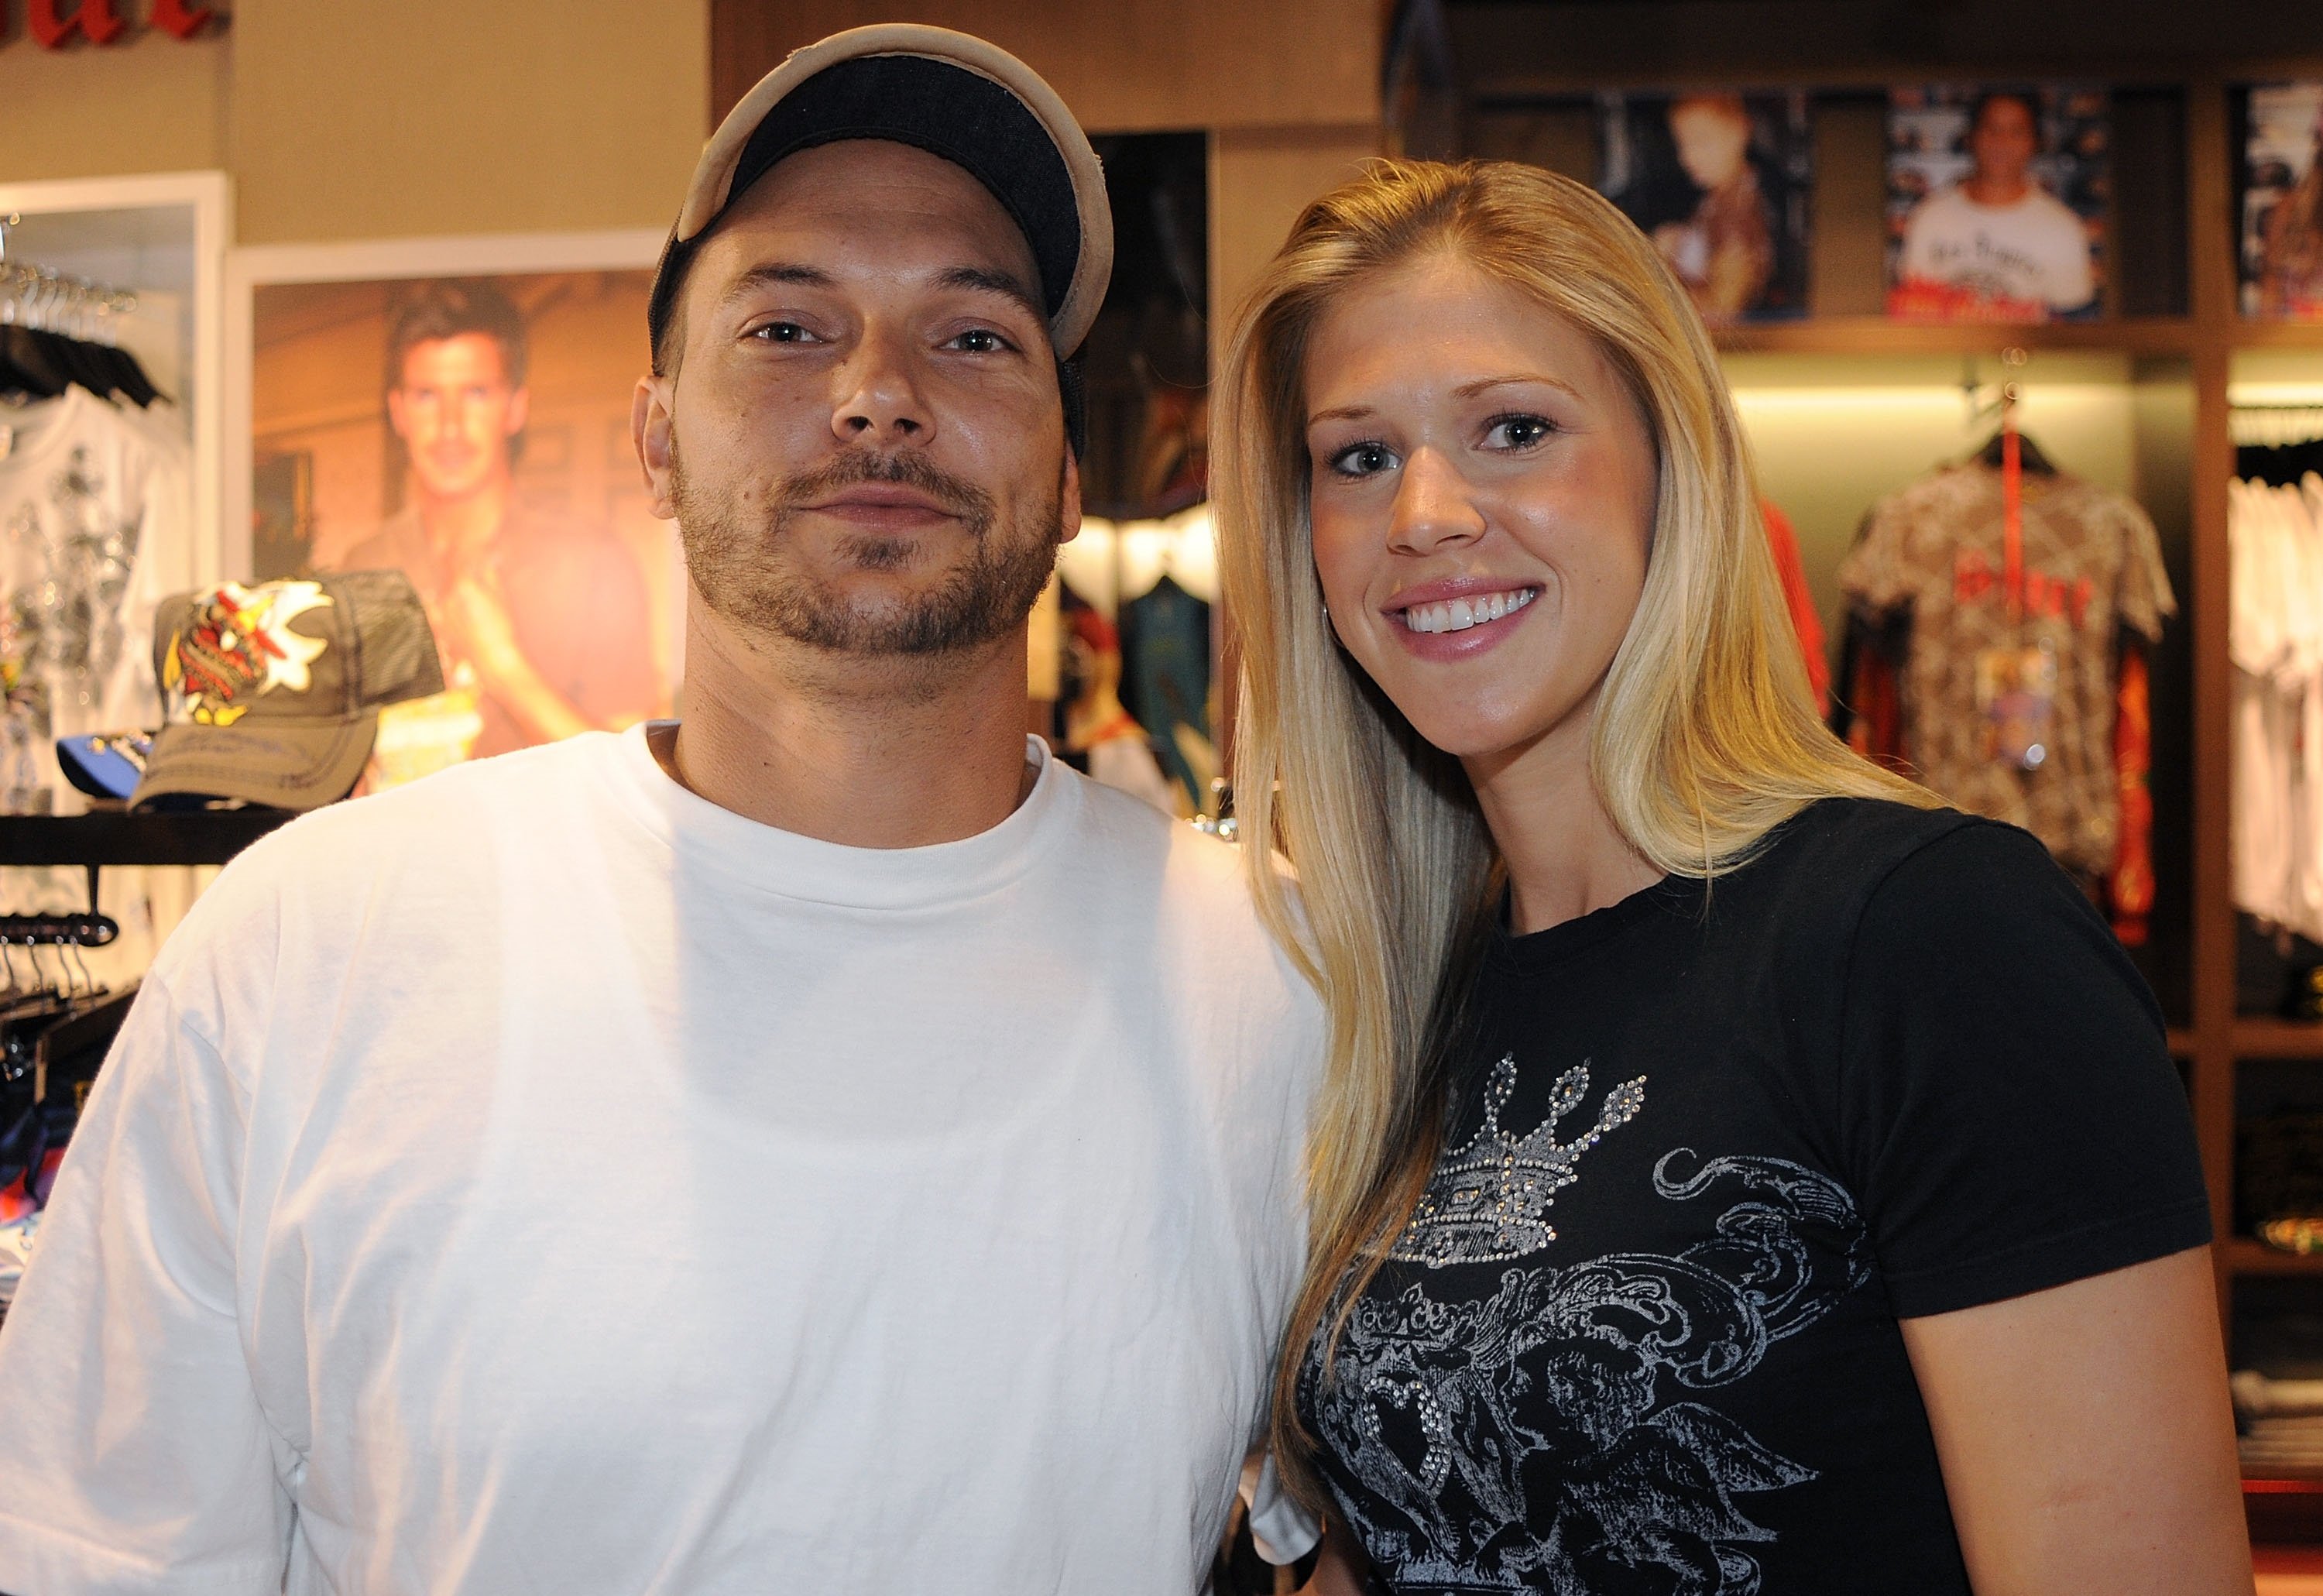 Kevin Federline and wife Victoria Prince posing at an Ed Hardy Store in Australia in 2009